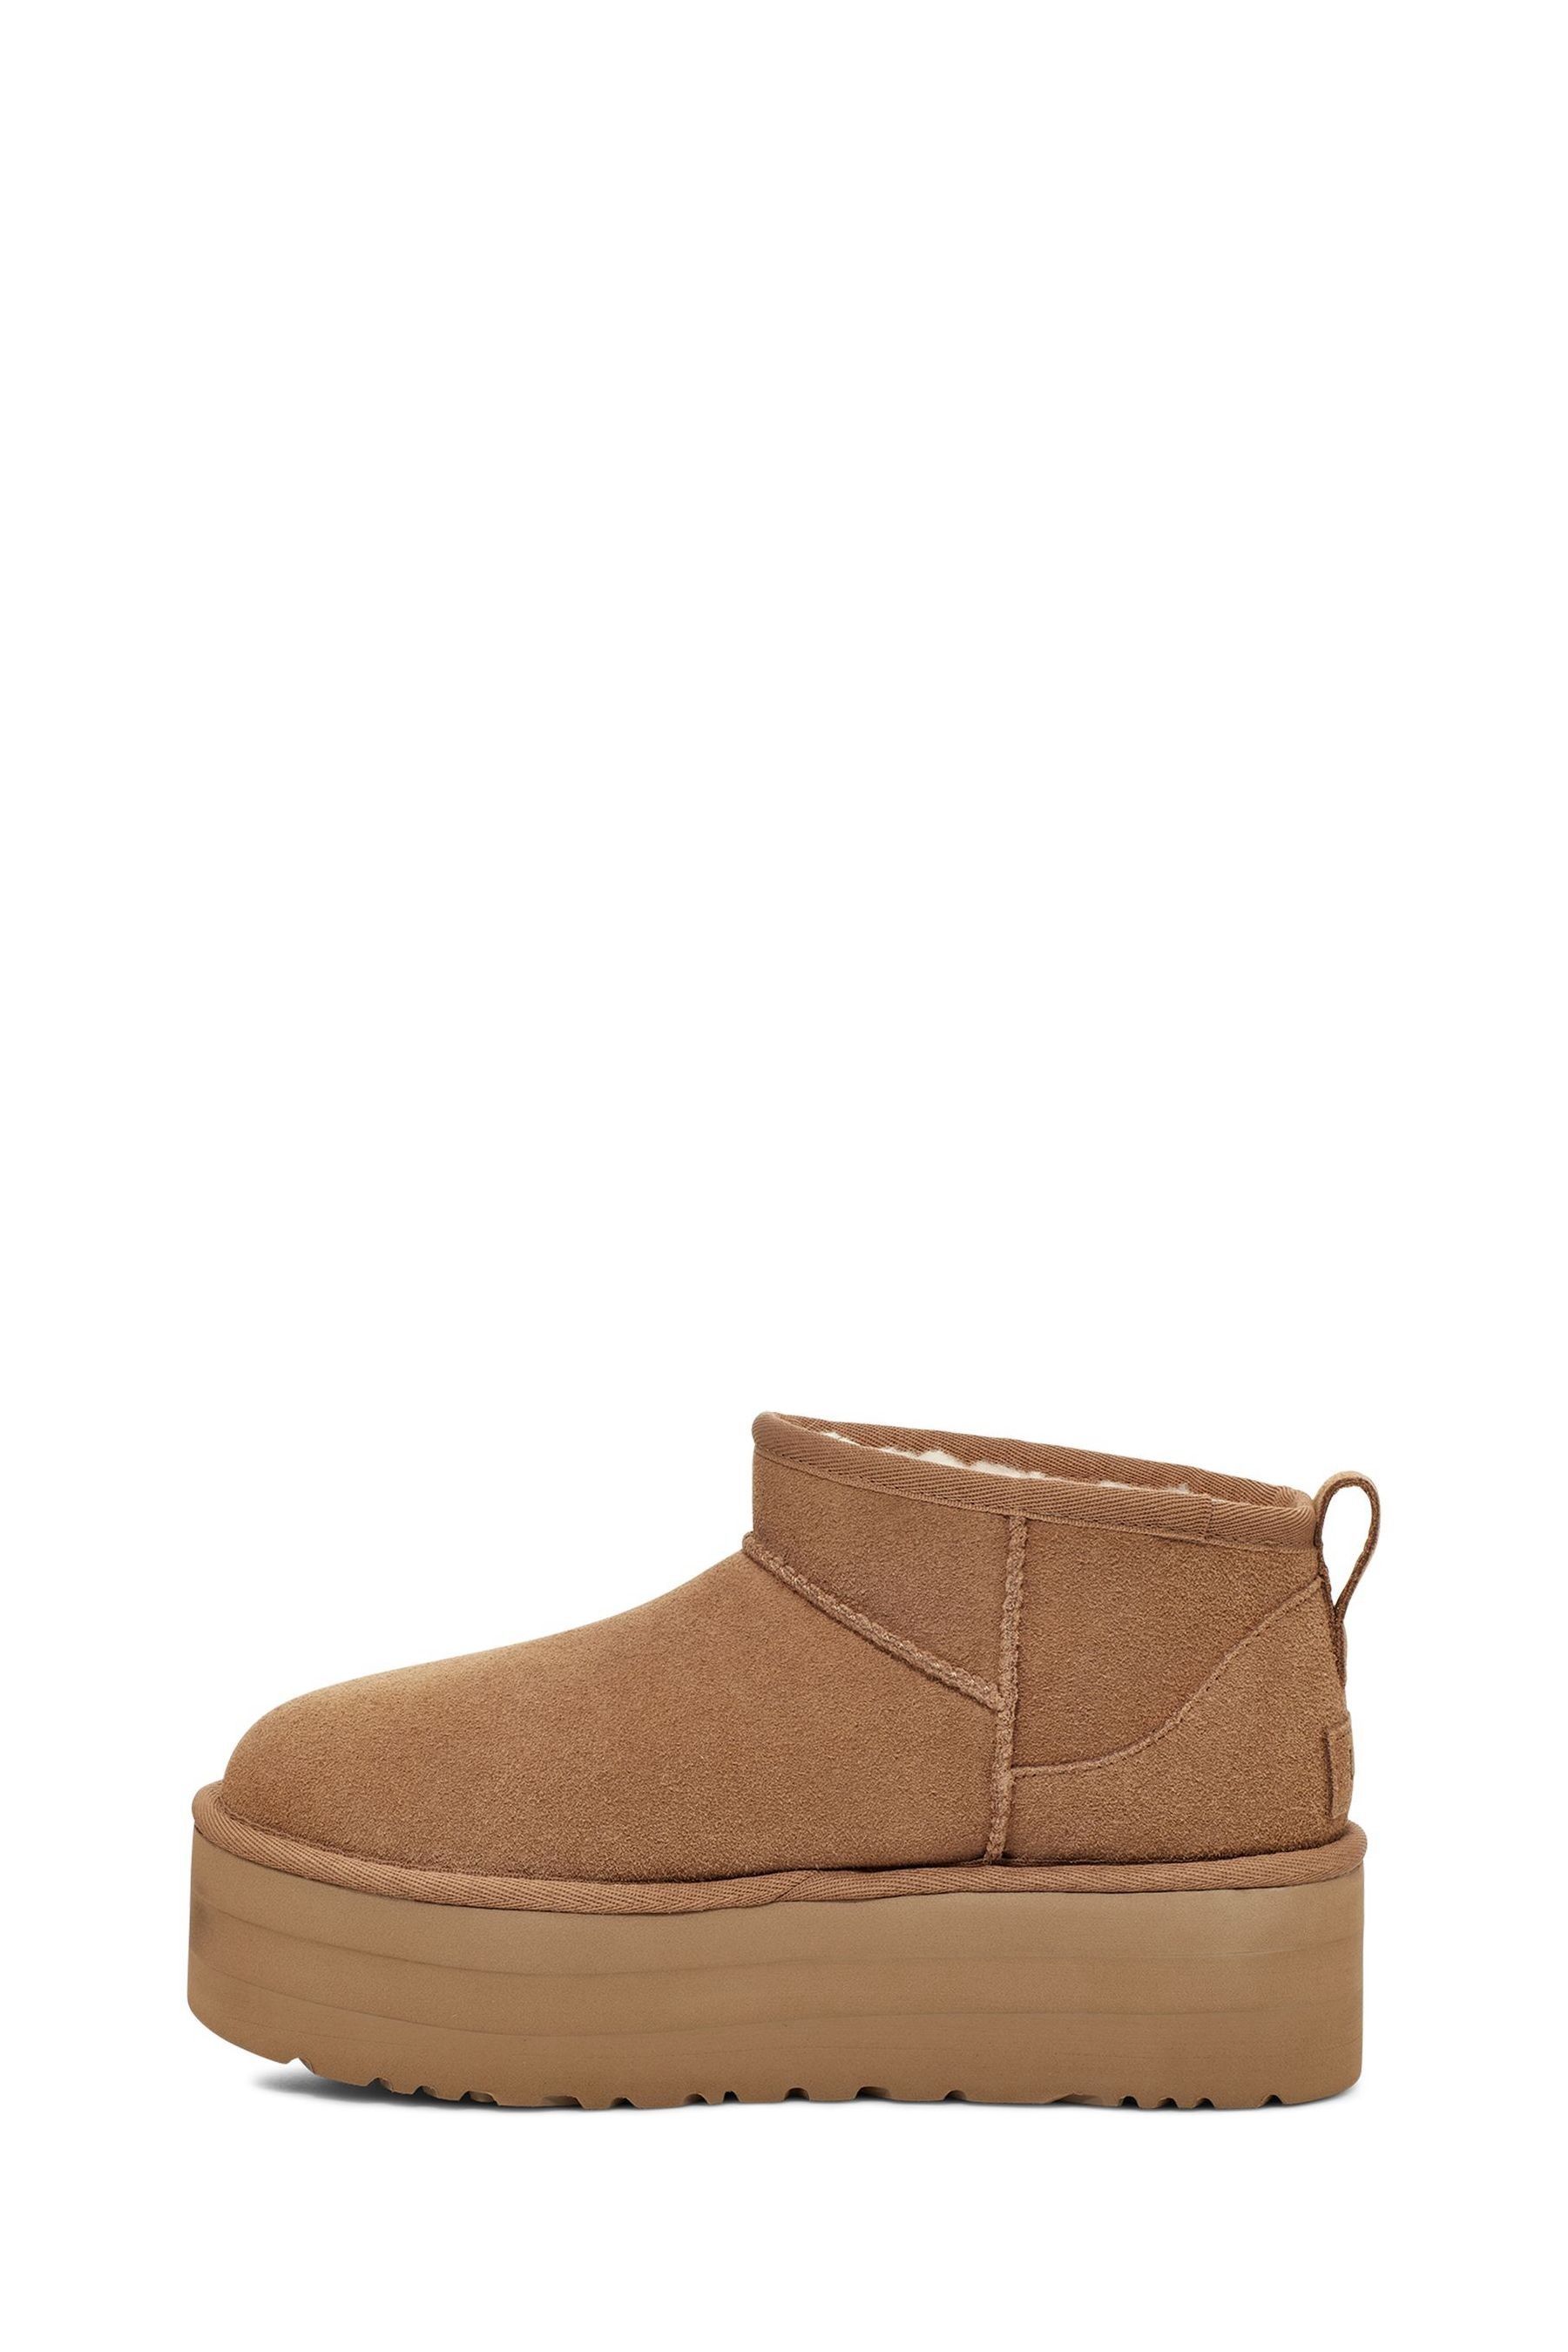 Buy UGG Classic Ultra Mini Platform Boots from the Next UK online shop